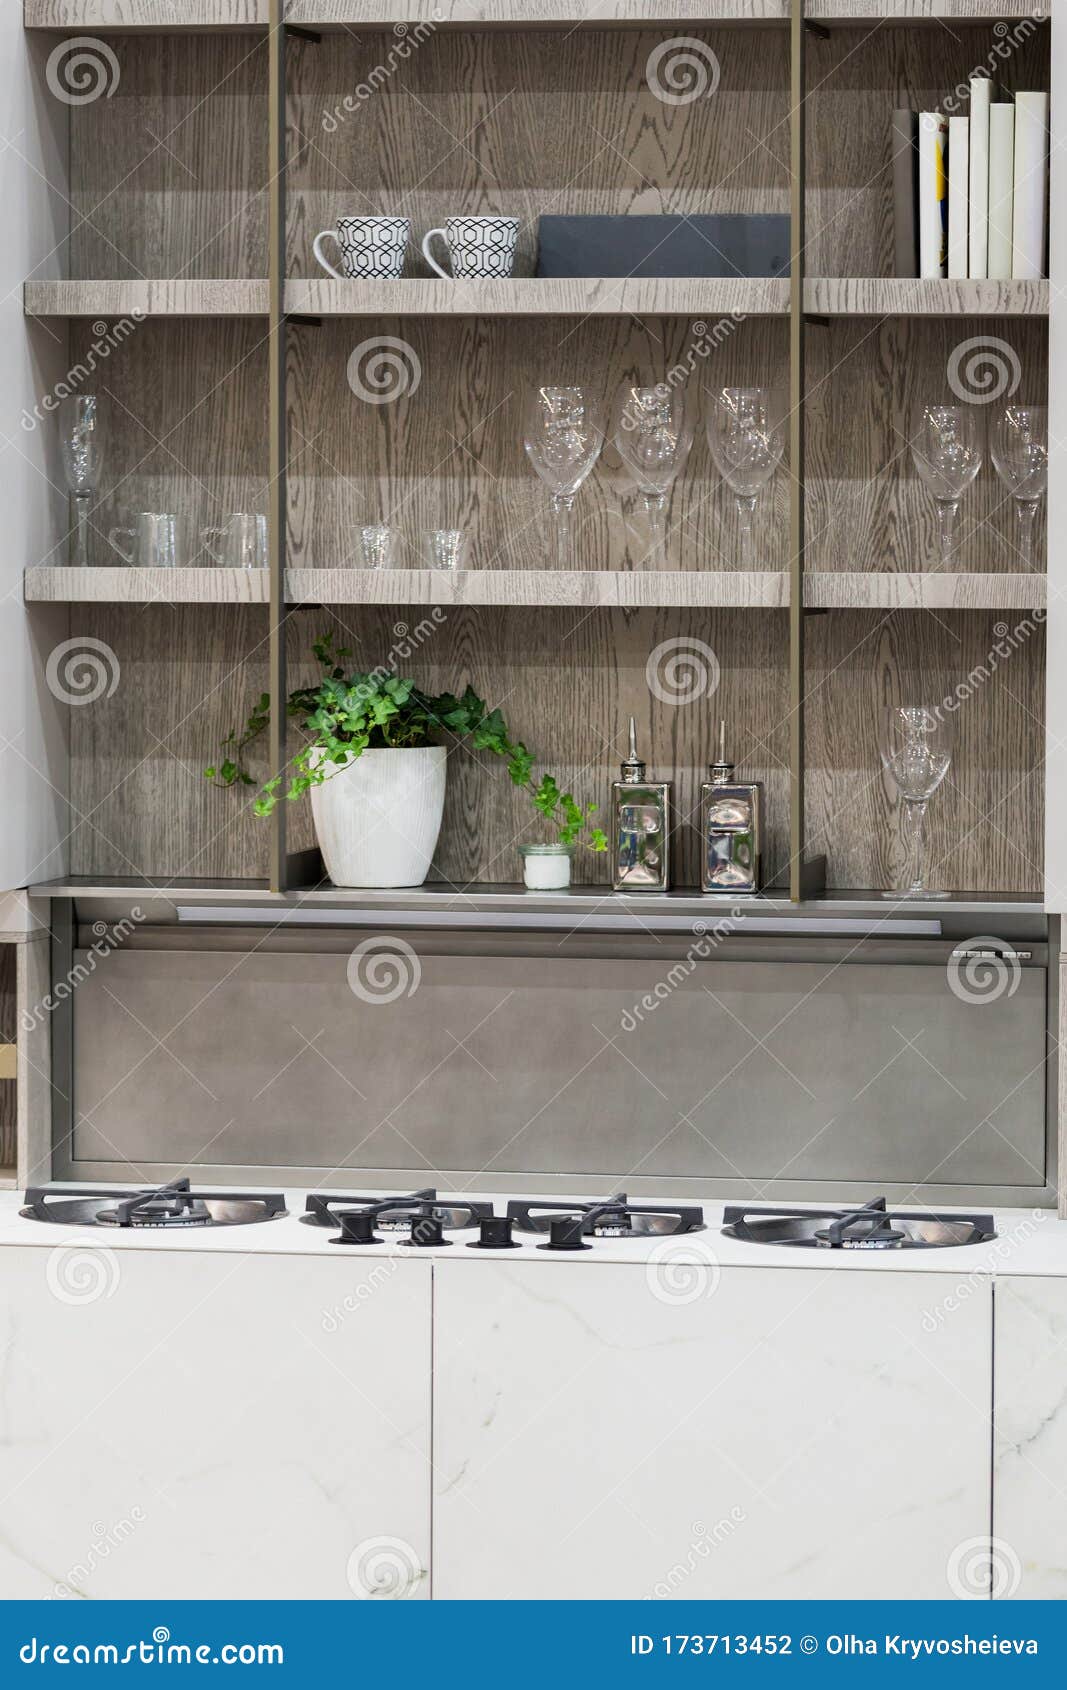 Stove Closeup In Modern Kitchen Interior Gas Burners Built Into The Countertop Hanging Glass Shelves With Glasses Stock Photo Image Of Design